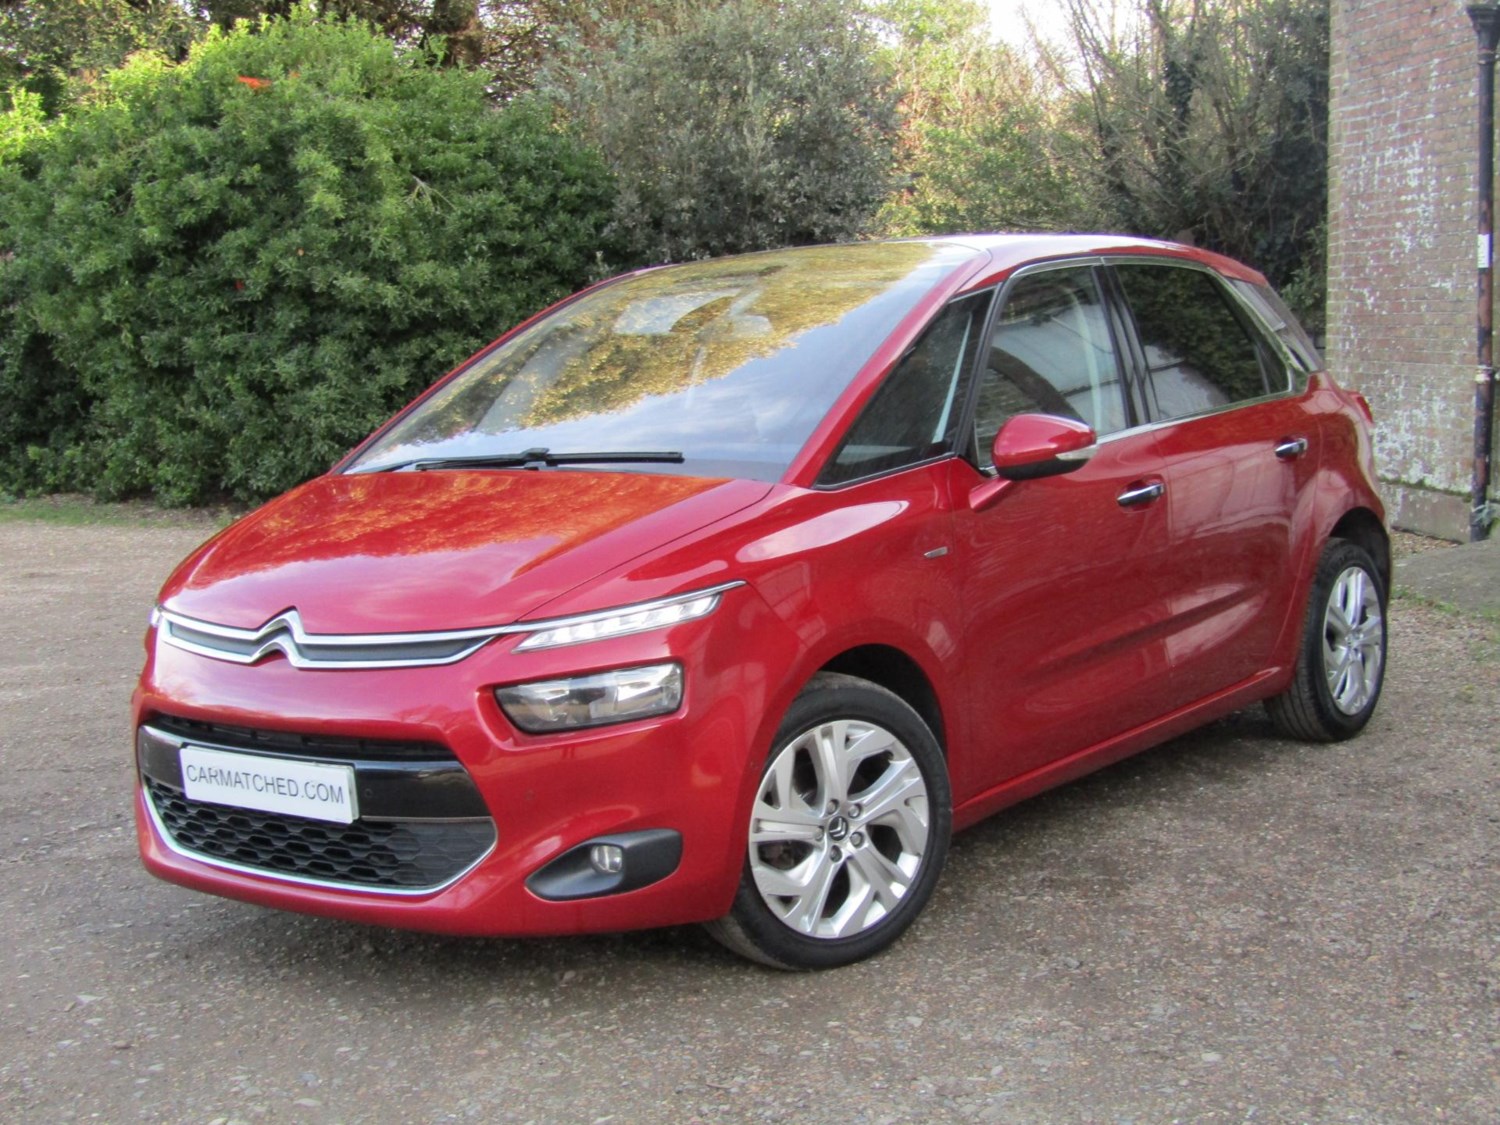 2014 (14) Citroen C4 Picasso 1.6 e-HDi 115 Airdream Exclusive+ 5dr For Sale In Broadstairs, Kent